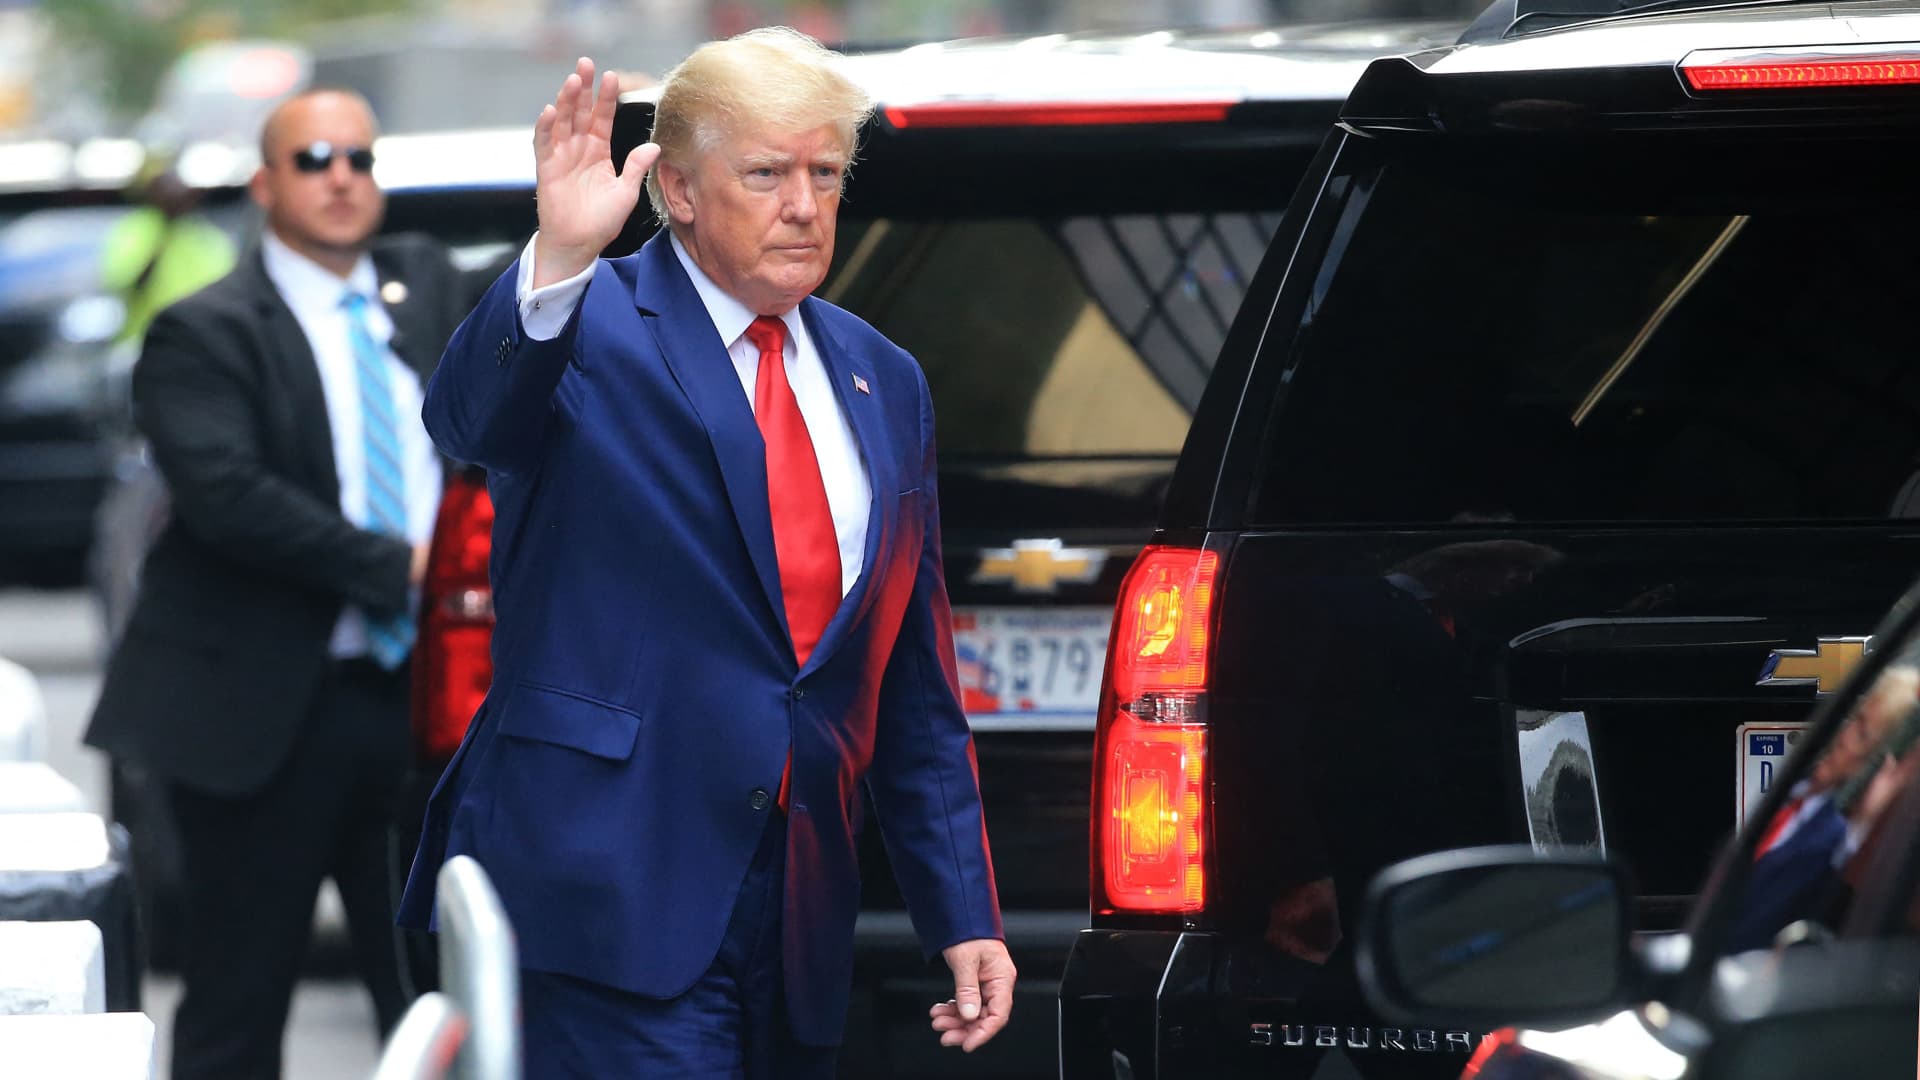 Former US President Donald Trump waves while walking to a vehicle in New York City on August 10, 2022. Donald Trump on Wednesday declined to answer questions under oath in New York over alleged fraud at his family business, as legal pressures pile up for the former president whose house was raided by the FBI just two days ago.